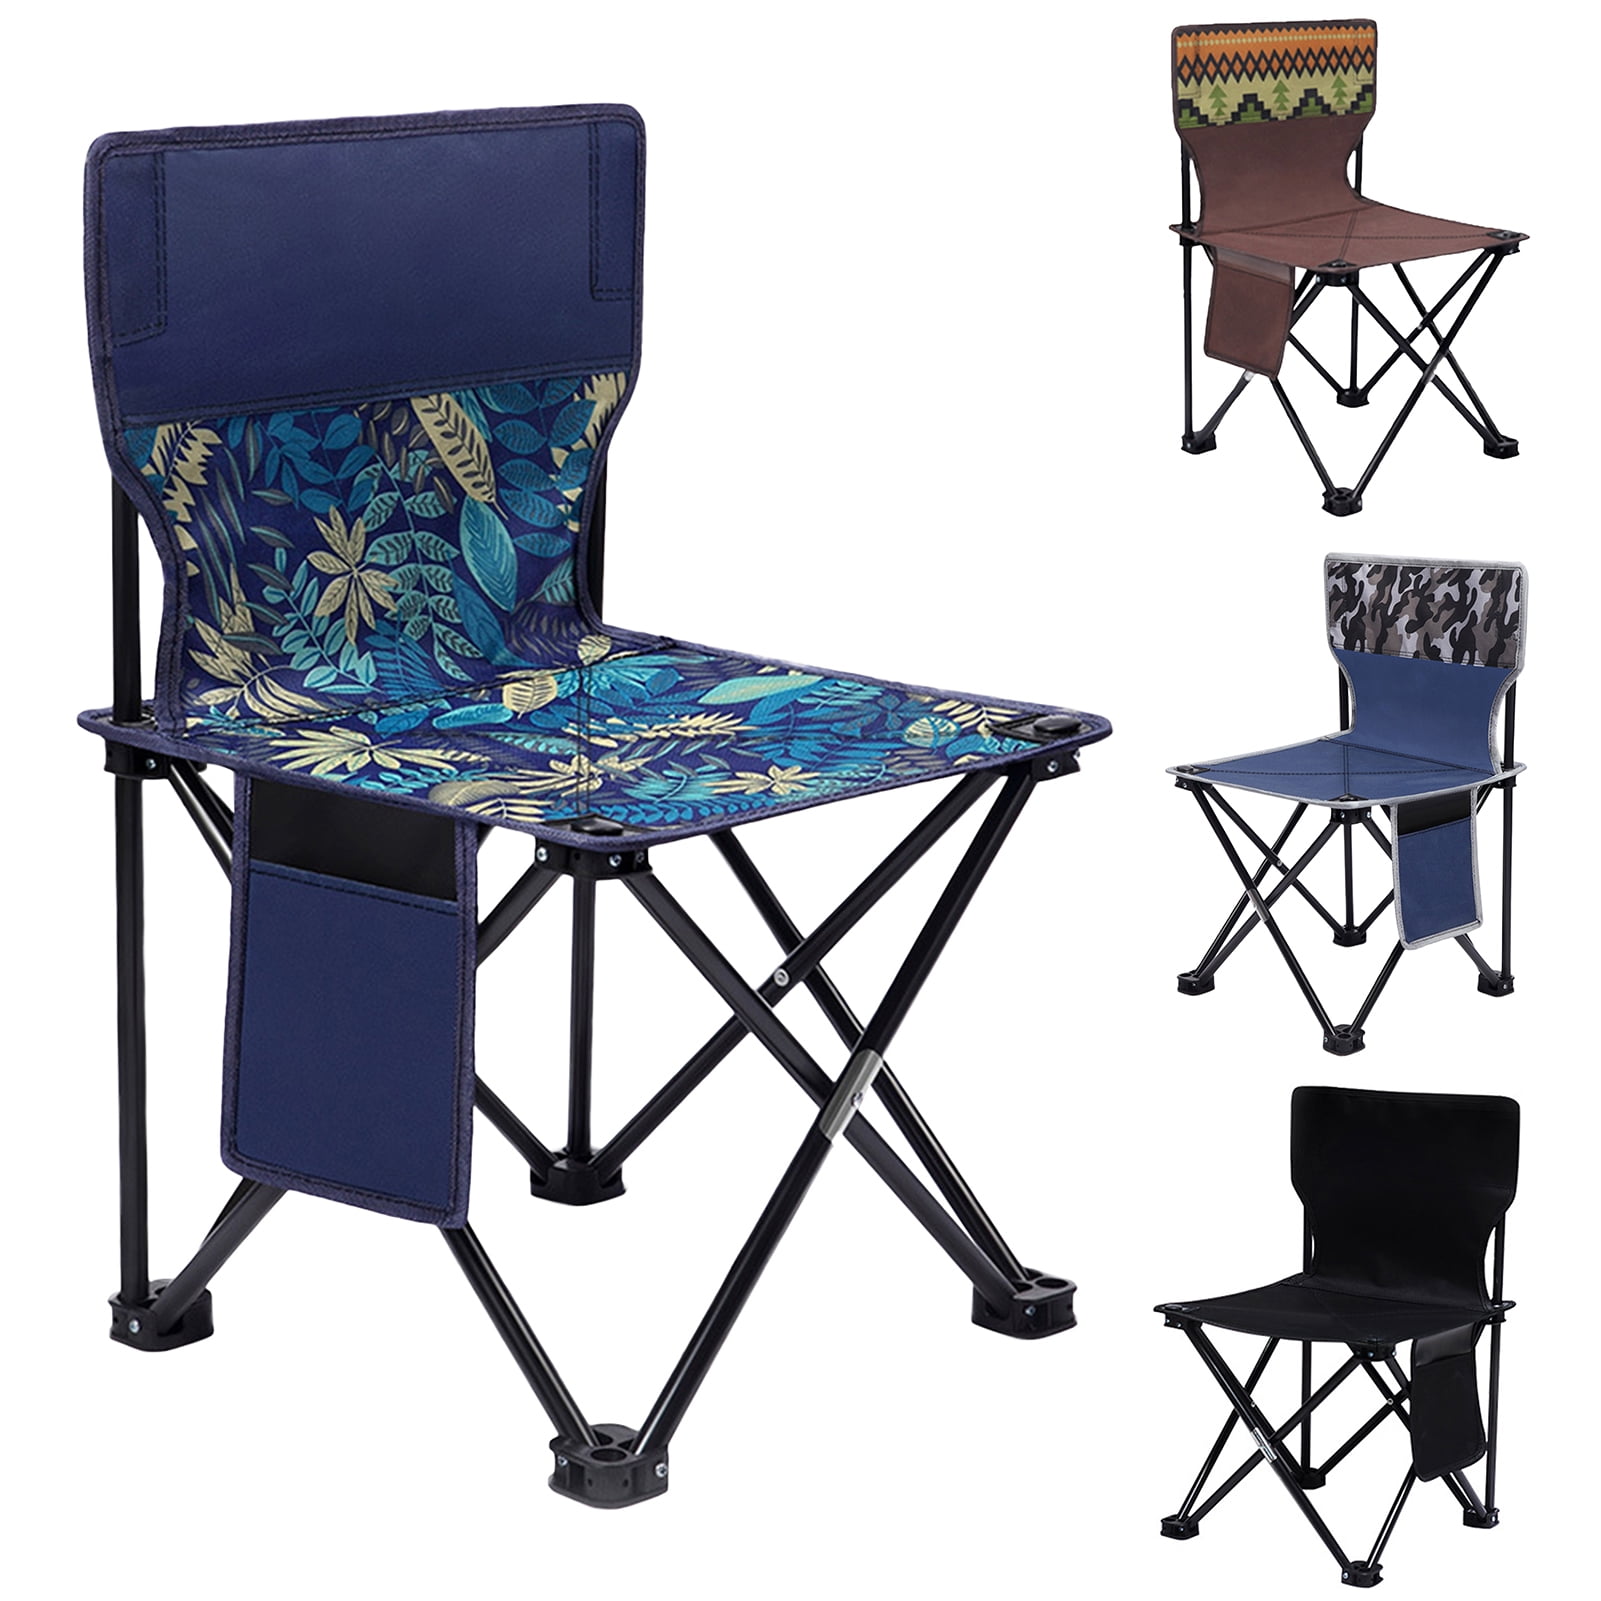 Set Of 4 Folding Camping Chair Portable Outdoor Seat Fishing Lightweight Stool 